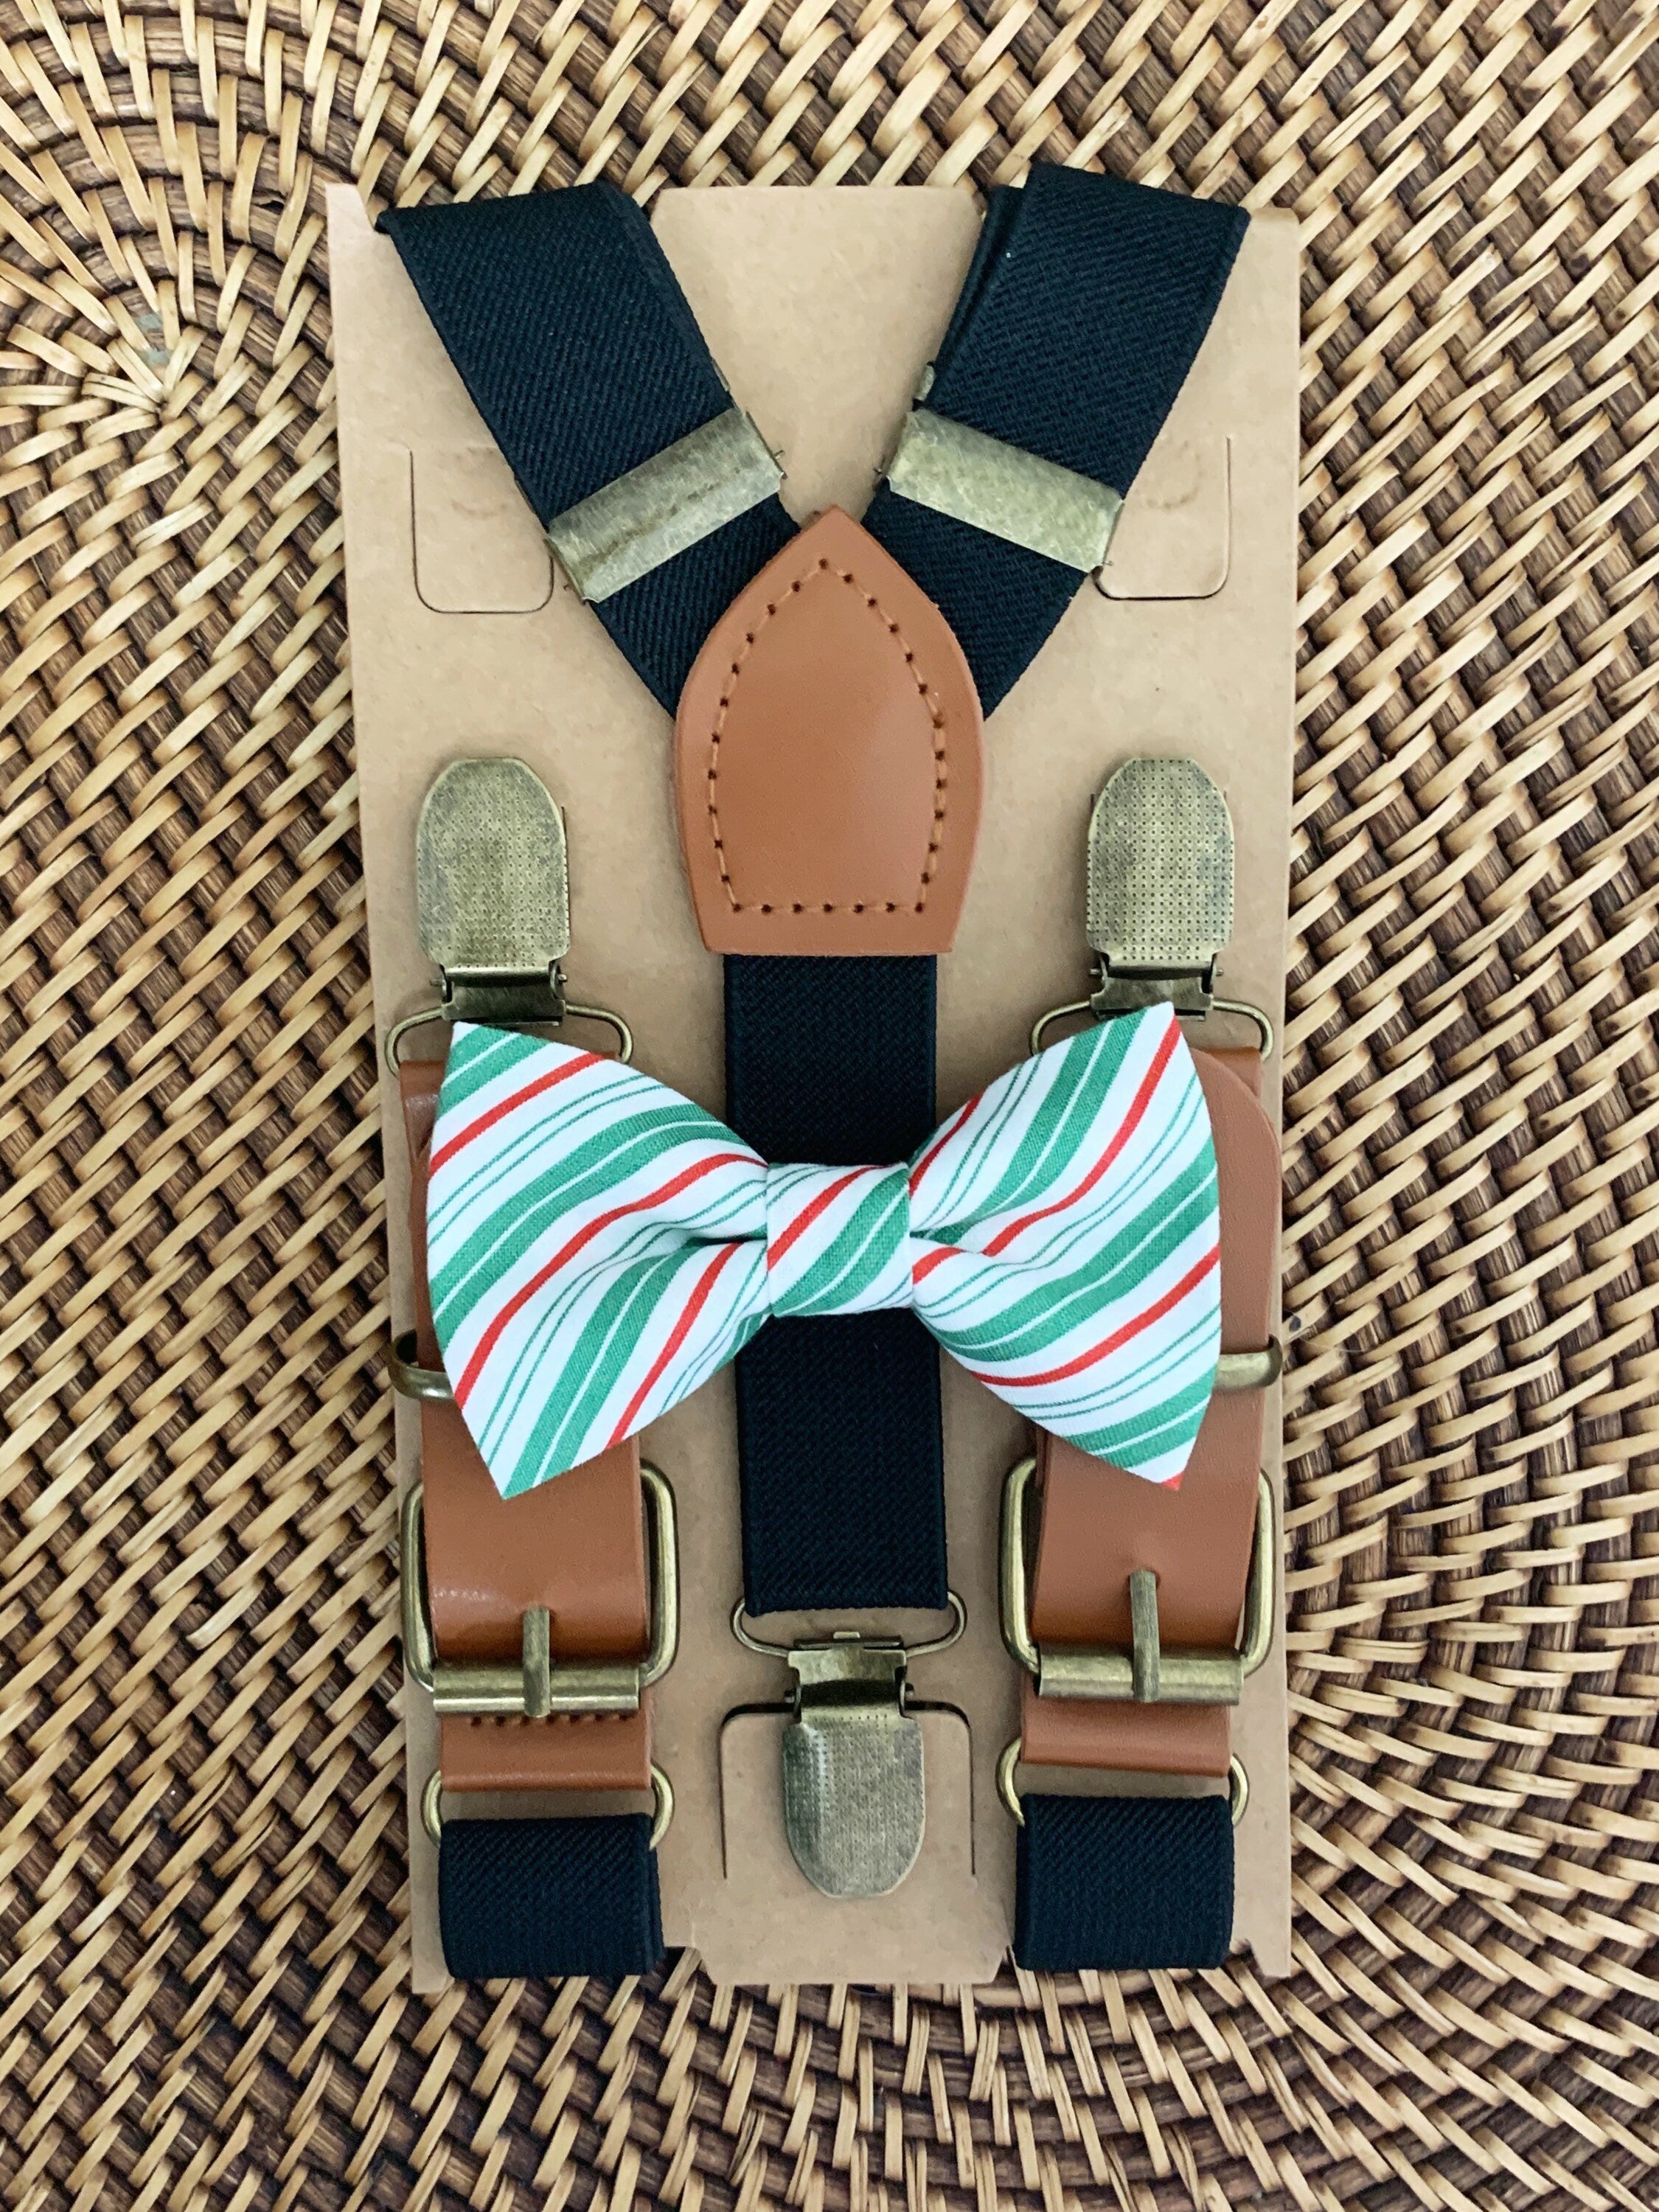 Christmas Candy-Striped Bow tie & Black Buckle Suspenders Set